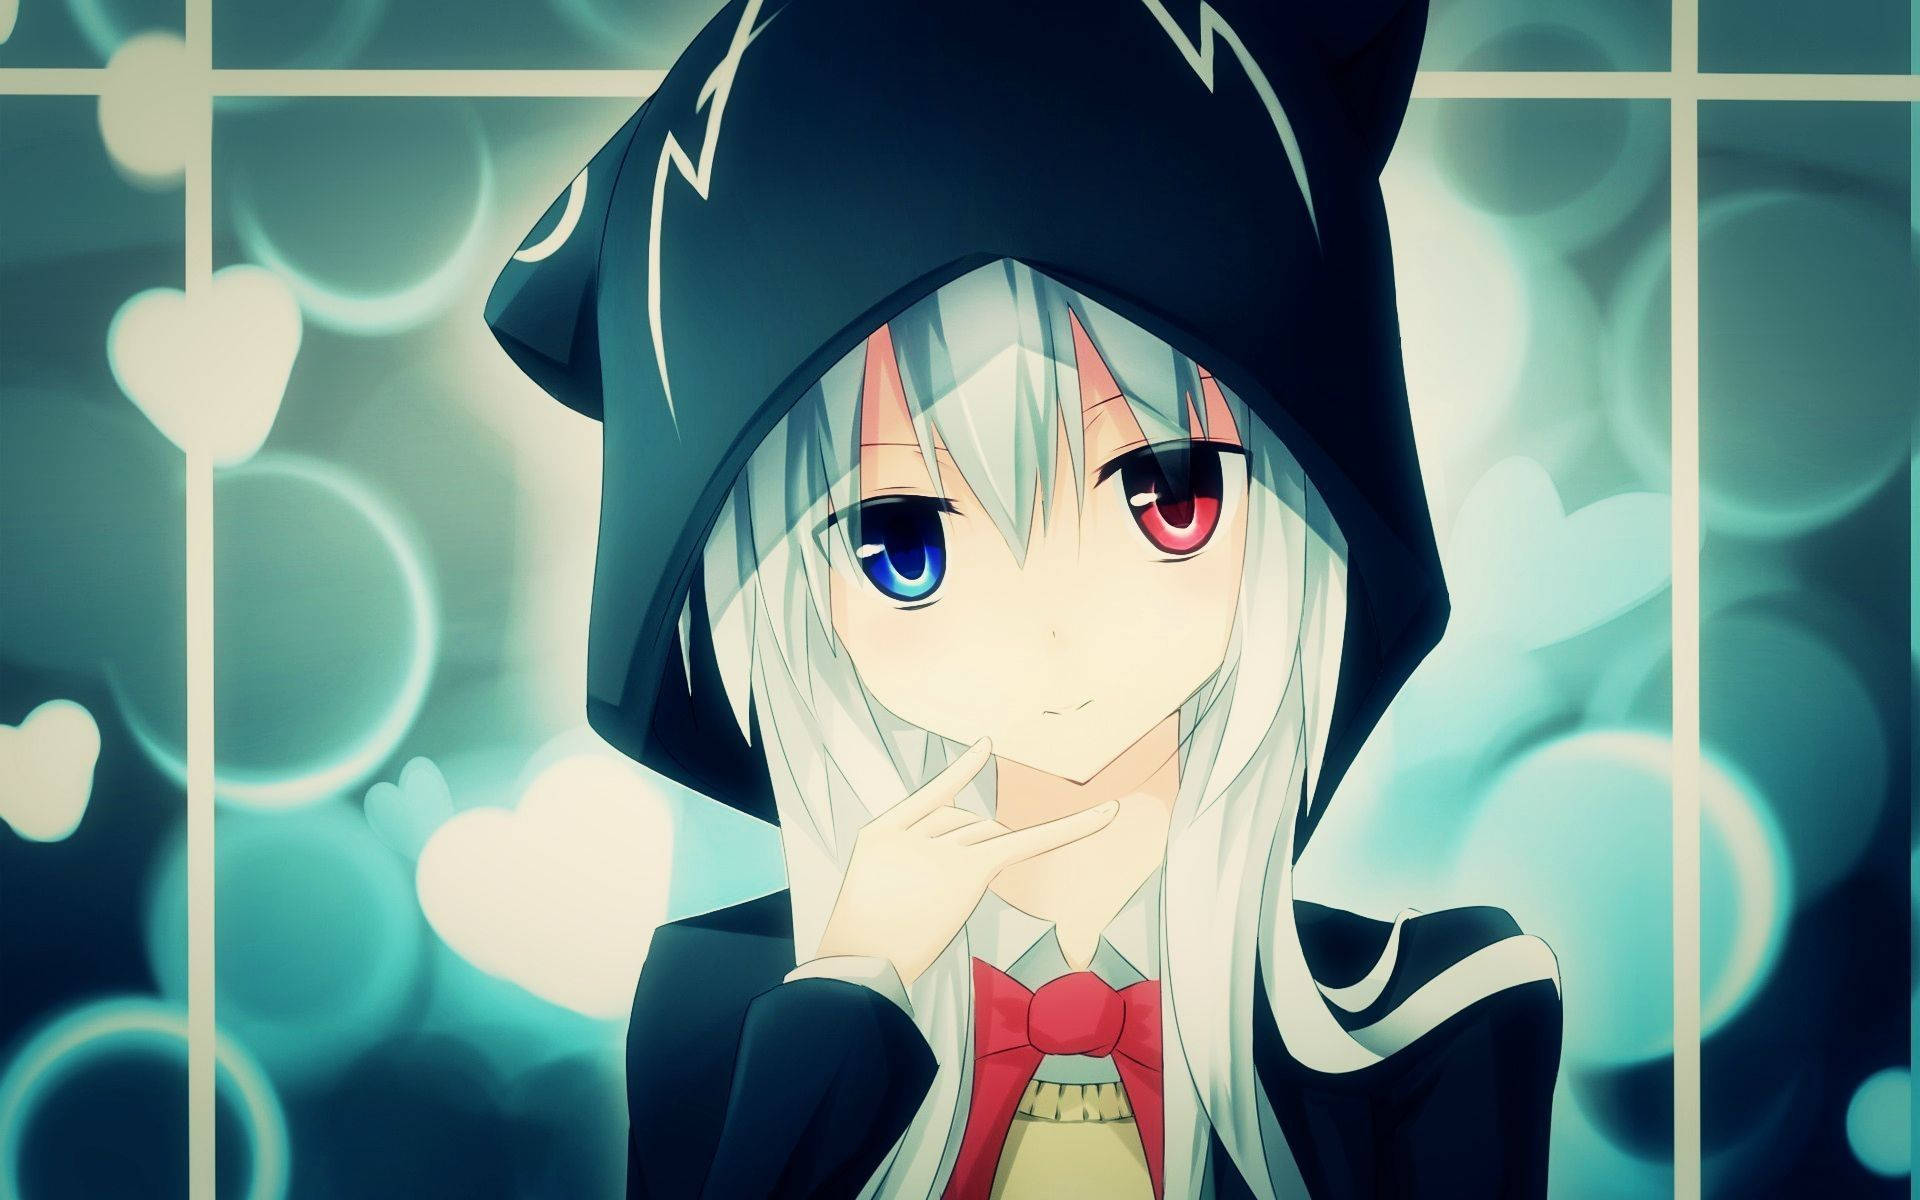 Red & Blue-eyed Anime Girl Hoodie Background